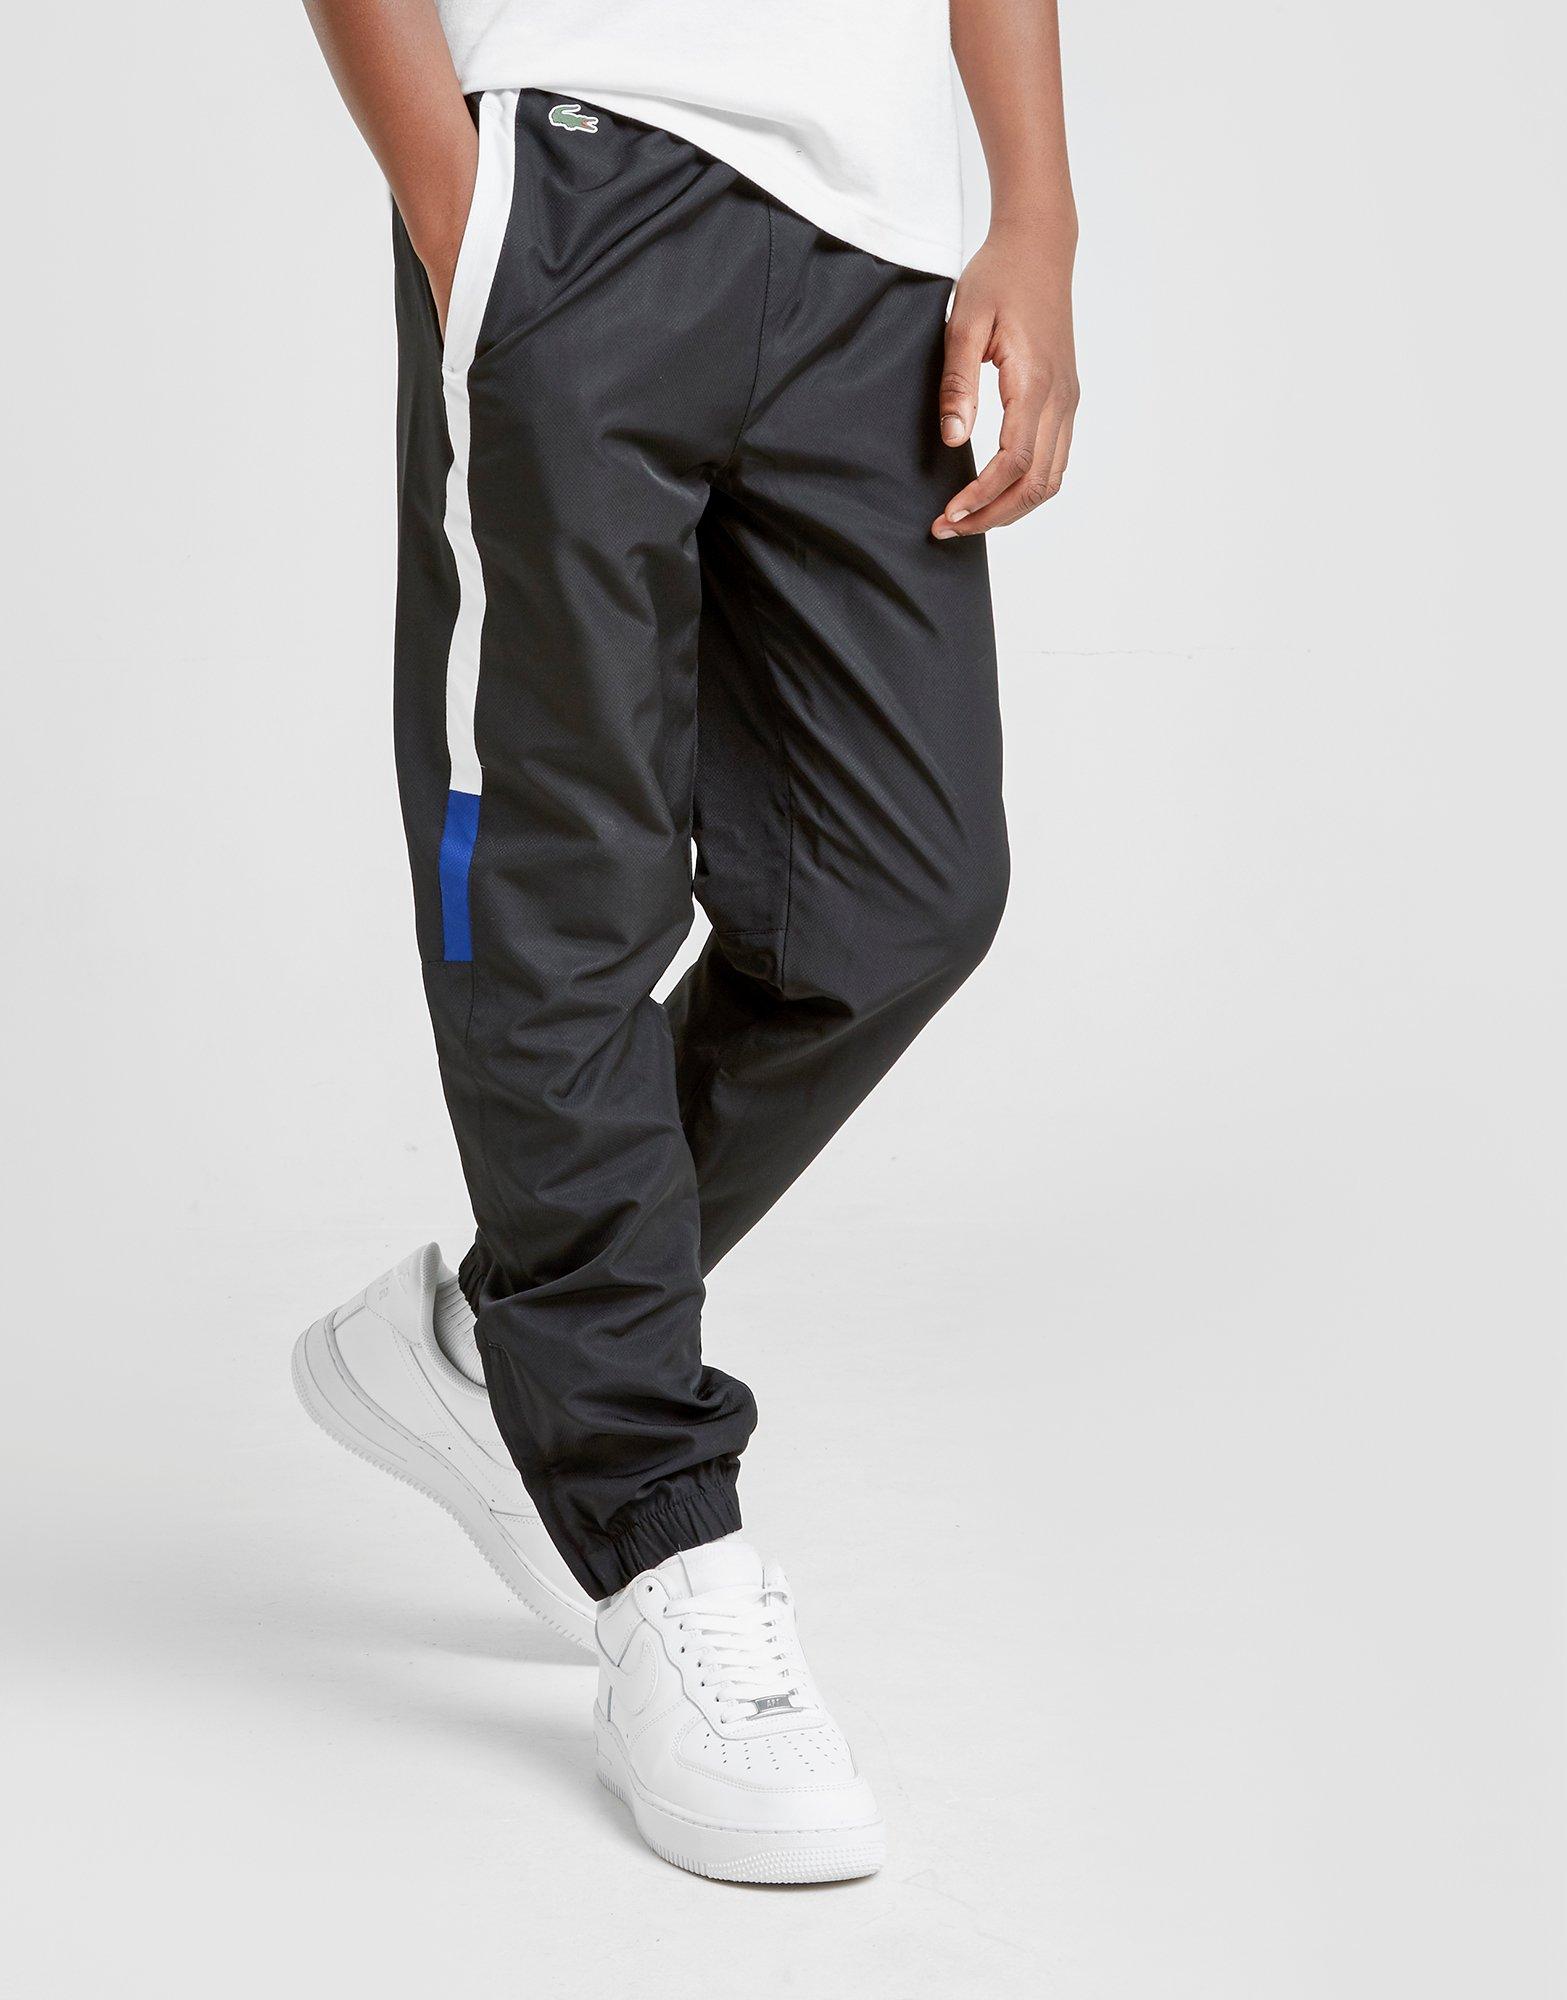 lacoste woven track pants